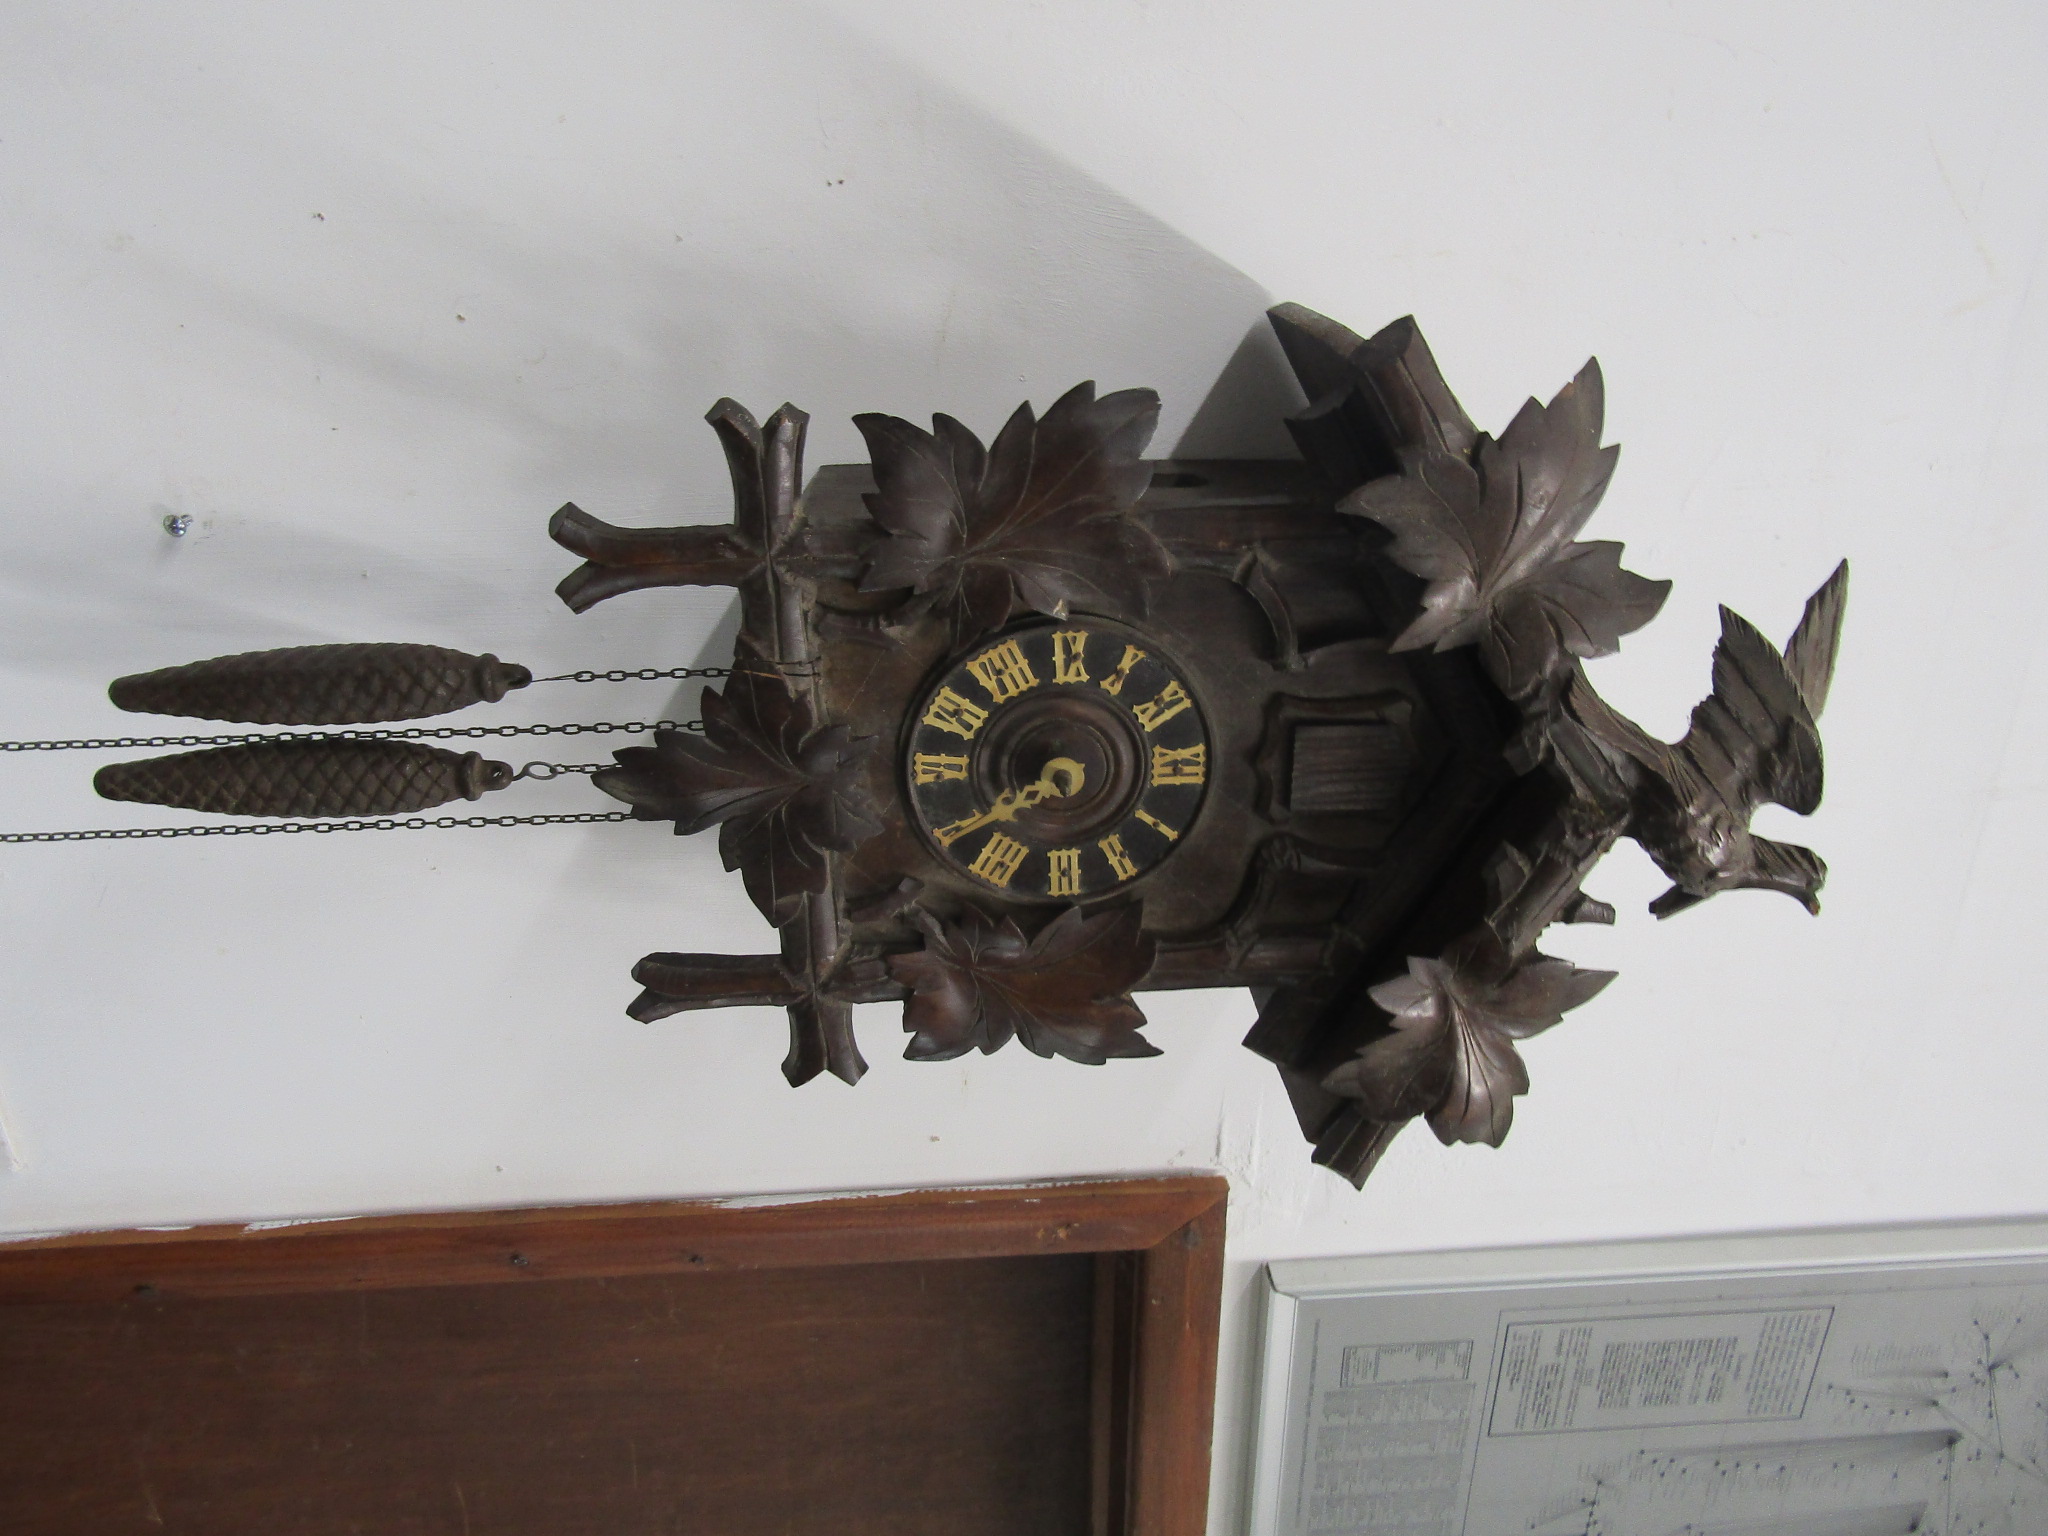 Early Camerer, Cuss & Co cuckoo clock with weights (needs some restoration)